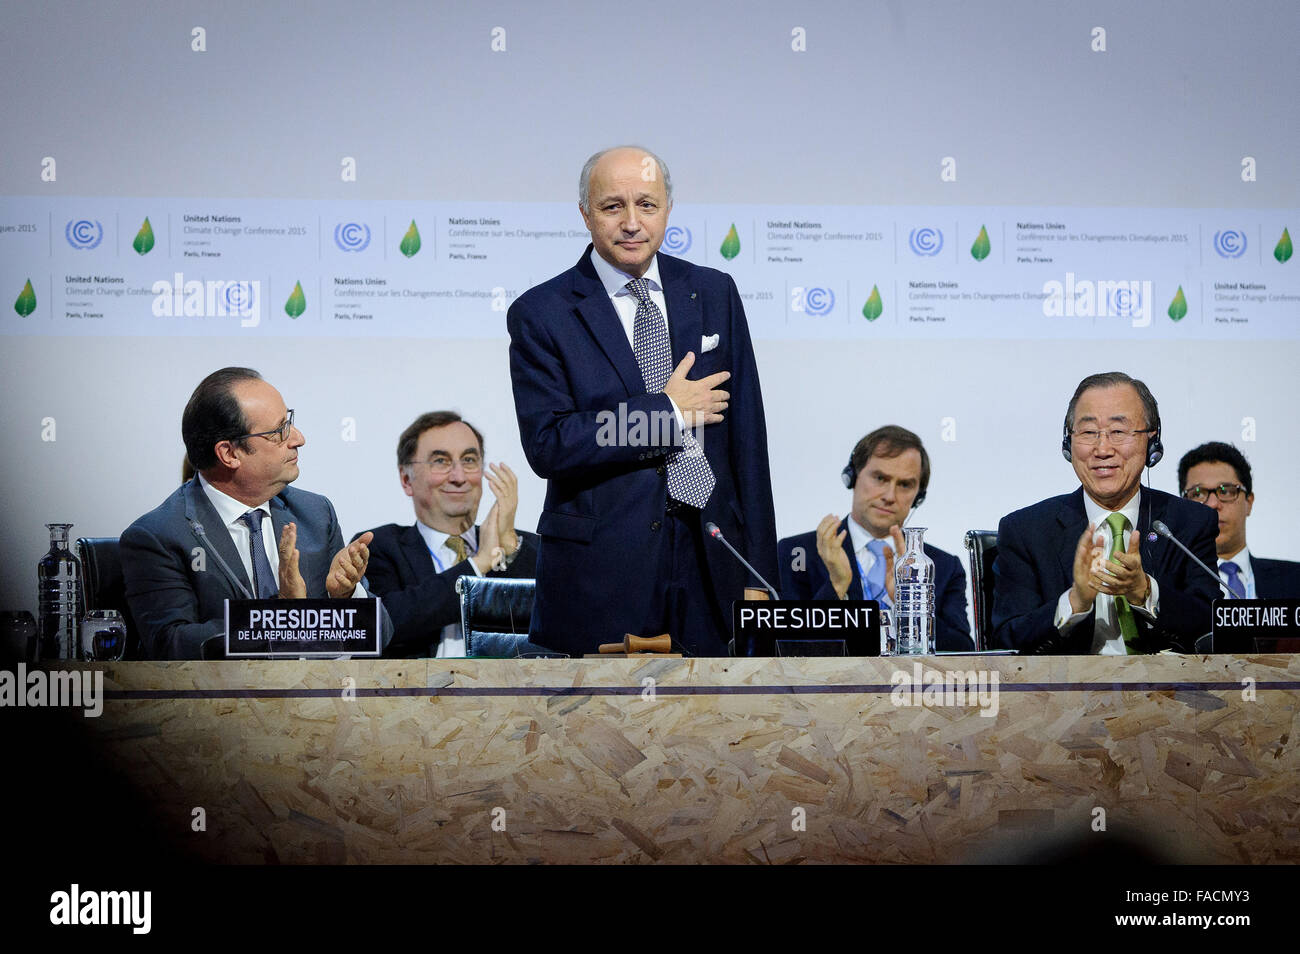 French Foreign Minister Laurent Fabius acknowledges applause after successfully steering a global agreement on greenhouse gas emissions at the COP21, United Nations Climate Change Conference December 12, 2015 in Le Bourget, France. United Nations Secretary General Ban ki-Moon and French President Francois Hollande applaud. Stock Photo